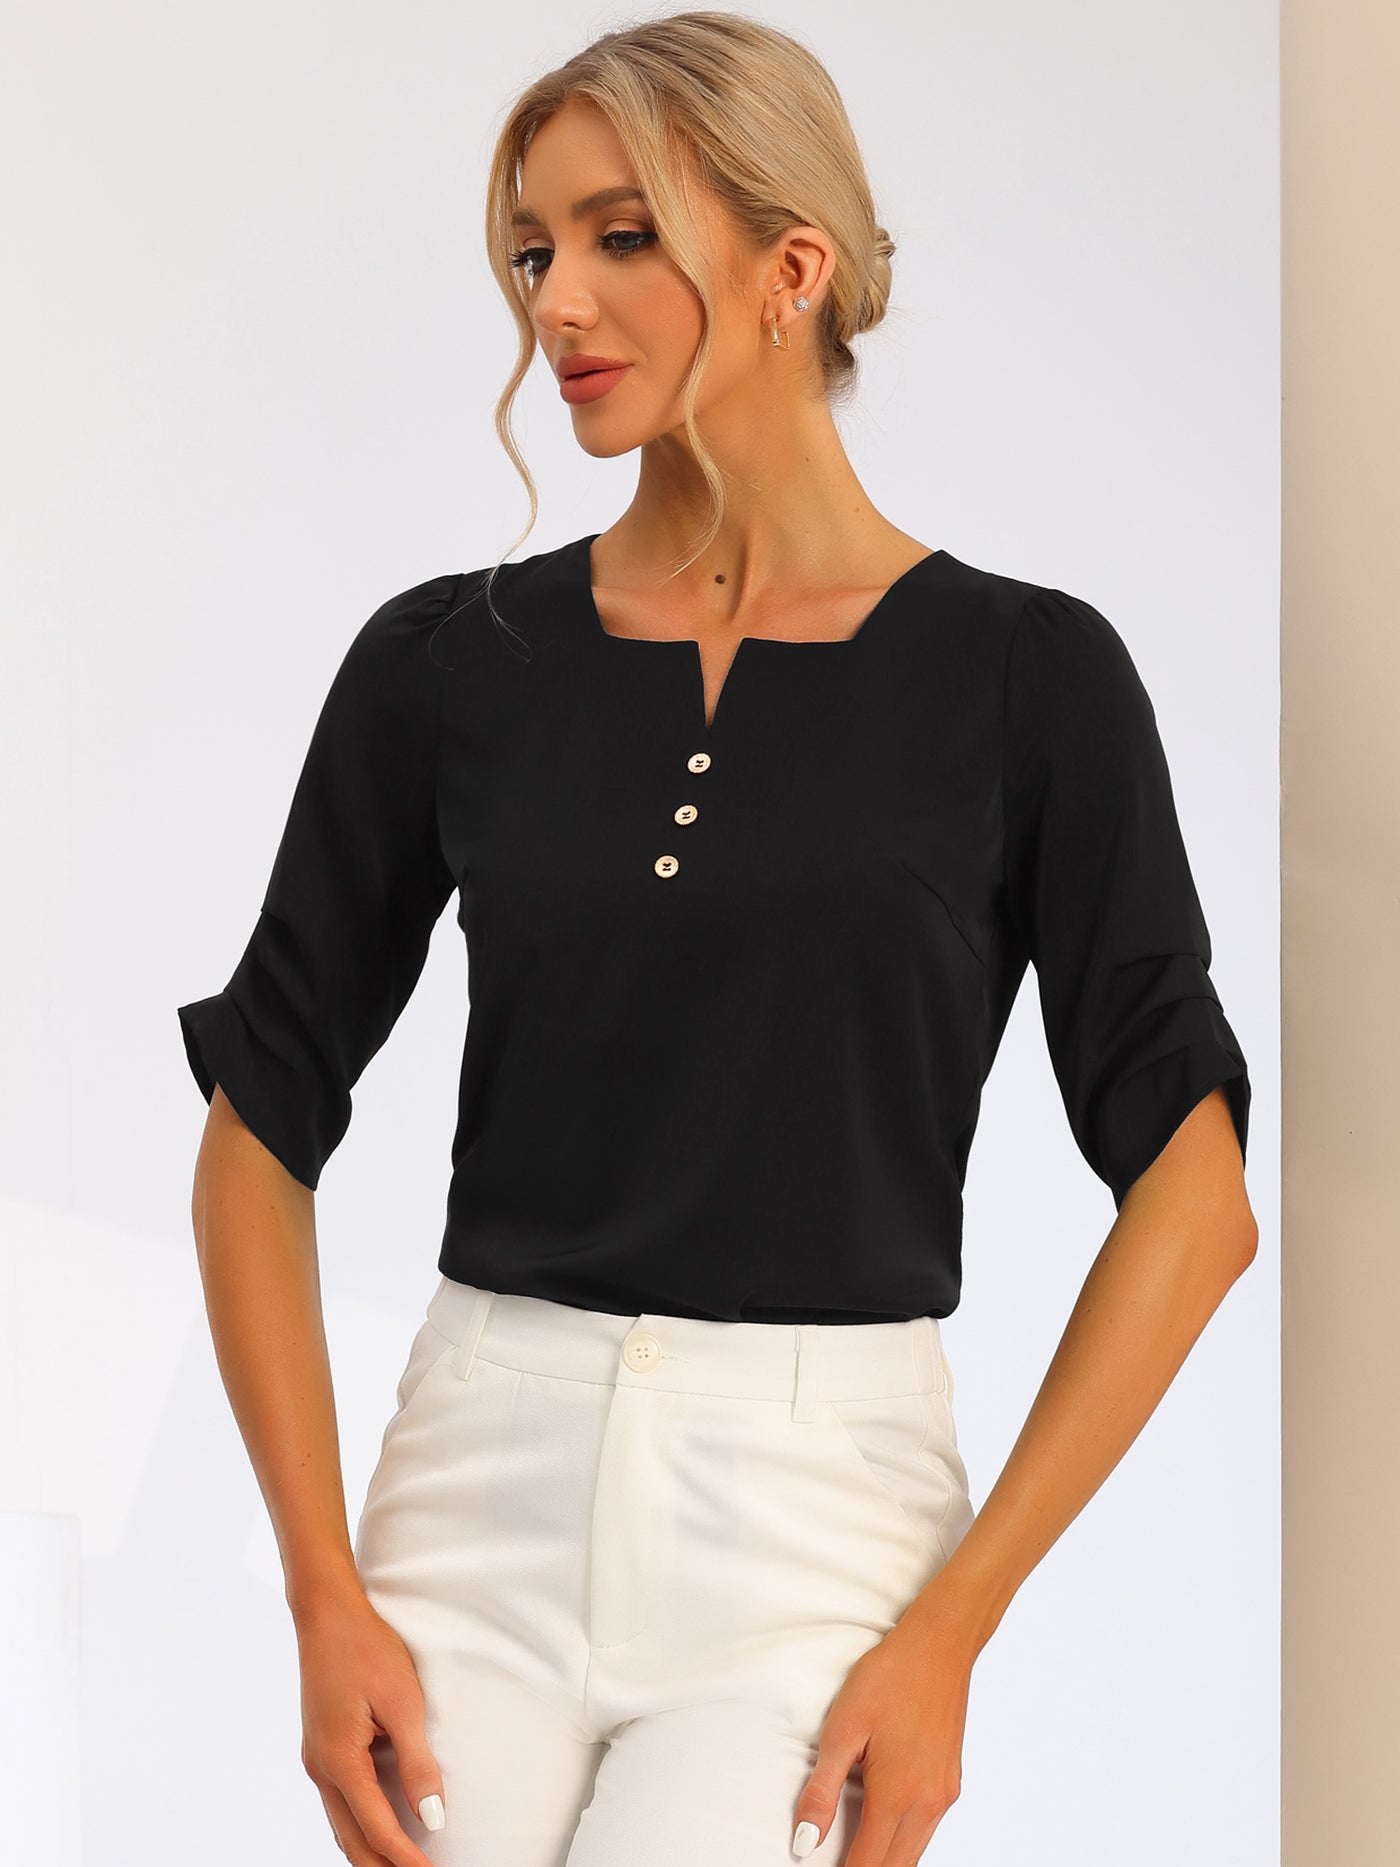 Allegra K Square Neck Pleated Tops Ruched Sleeve Chiffon Office Work Blouse